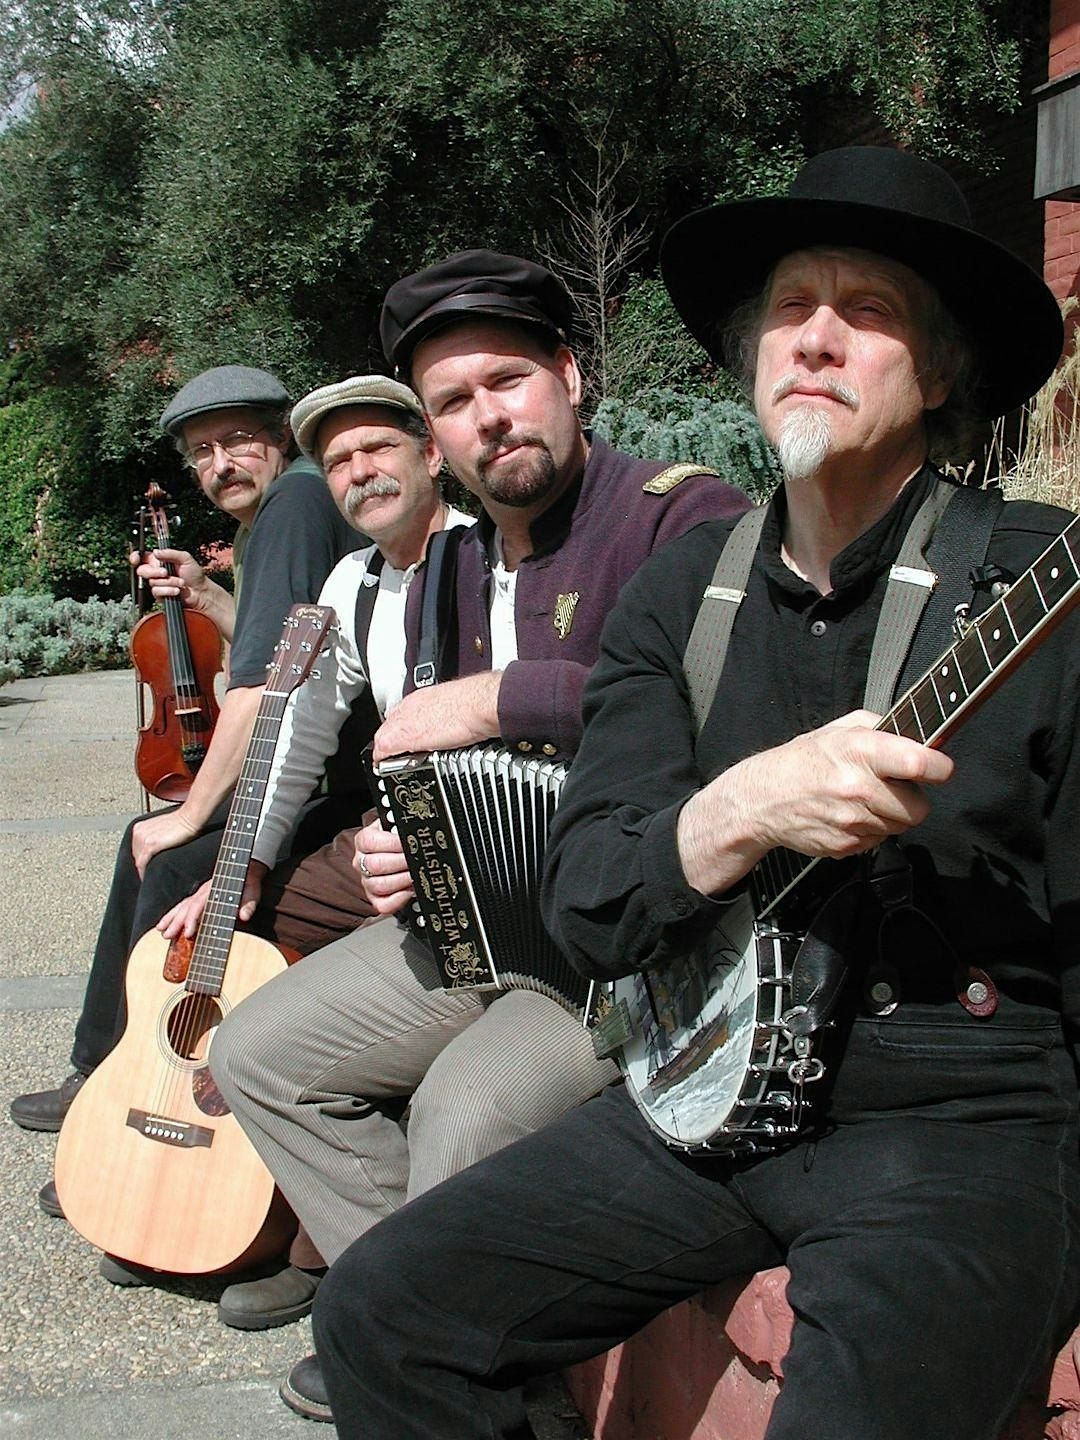 Fundraiser event featuring the Celtic musicians, The Black Irish Band